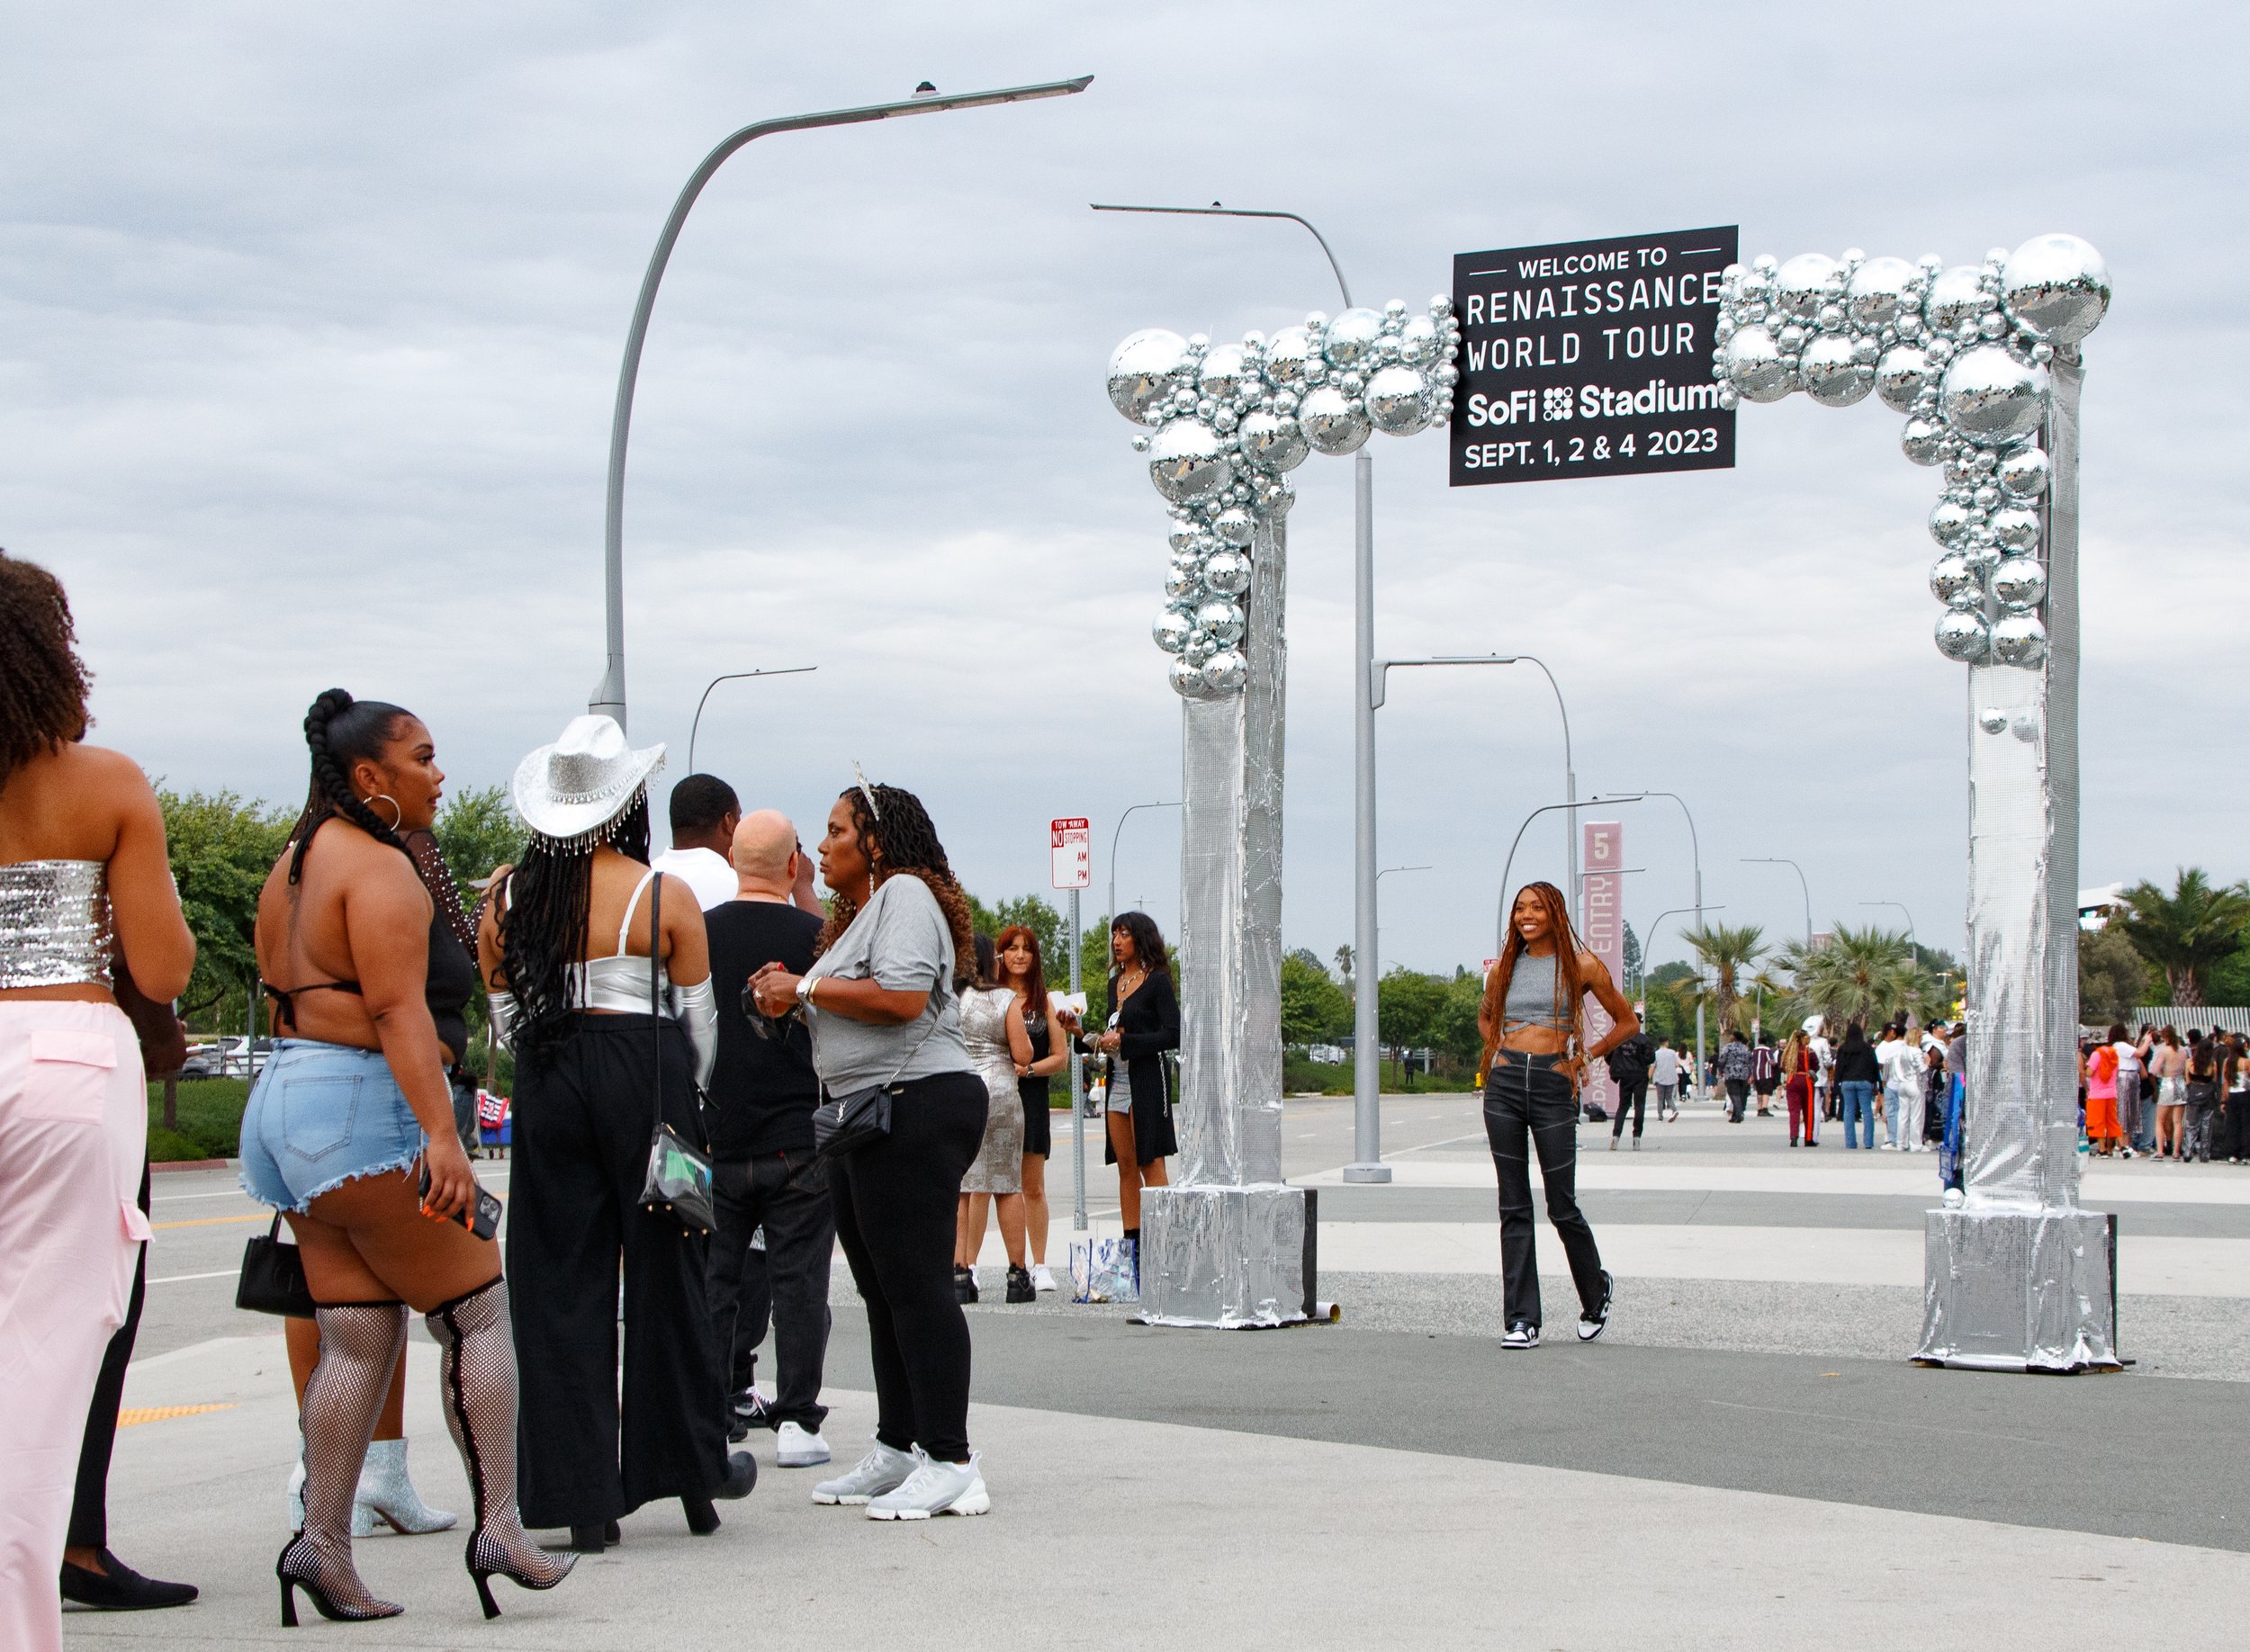  Concert goers arriving at the Sofi Stadium to watch Beyonce perform her show "The Renaissance World Tour". September 1, 2023 Inglewood California Alejandro Contreras | The Corsair 